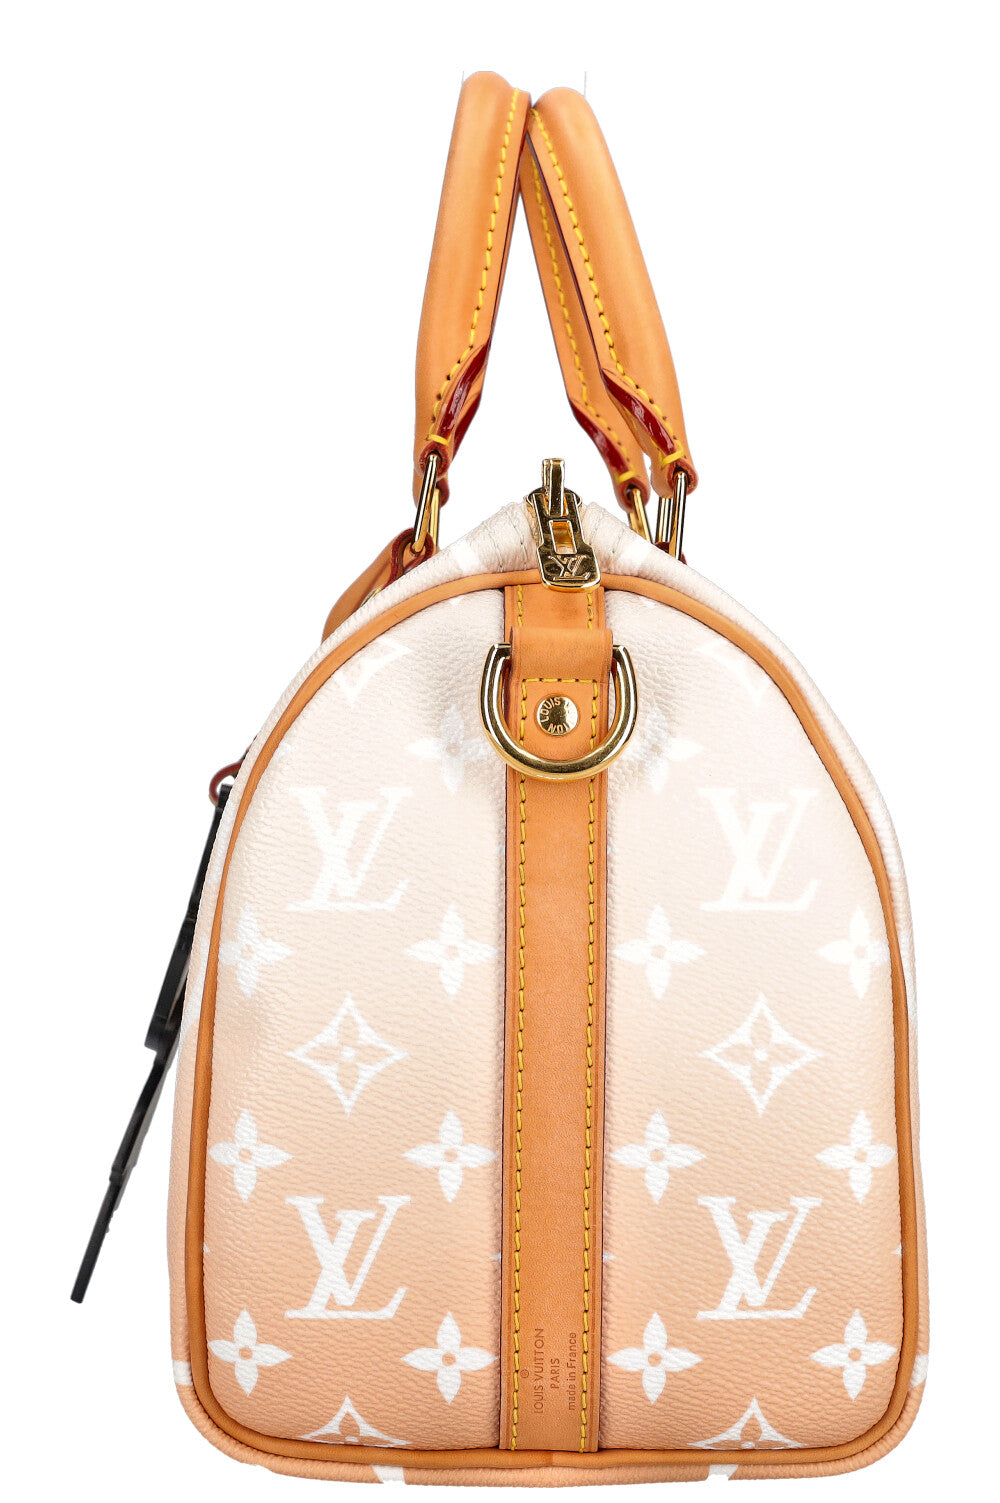 LOUIS VUITTON By the Pool Speedy 25